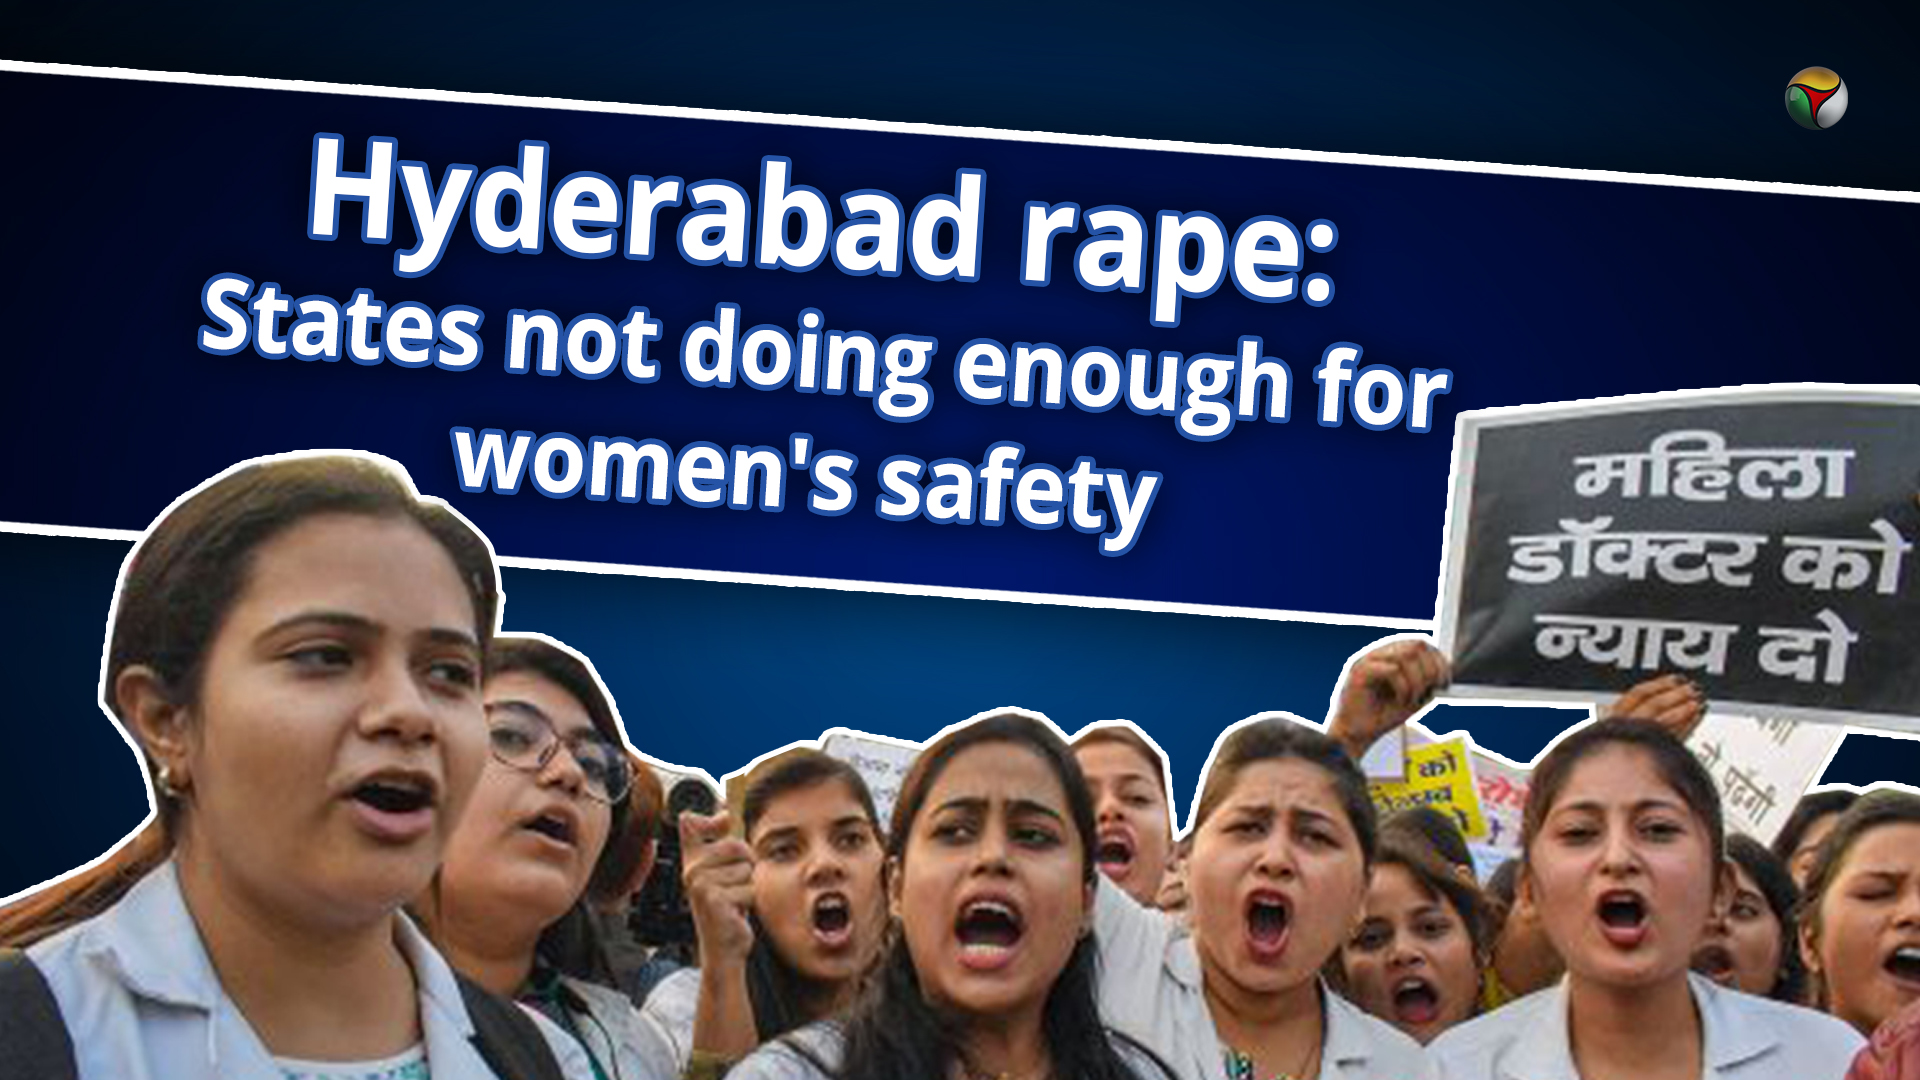 Hyderabad rape: States not doing enough for womens safety